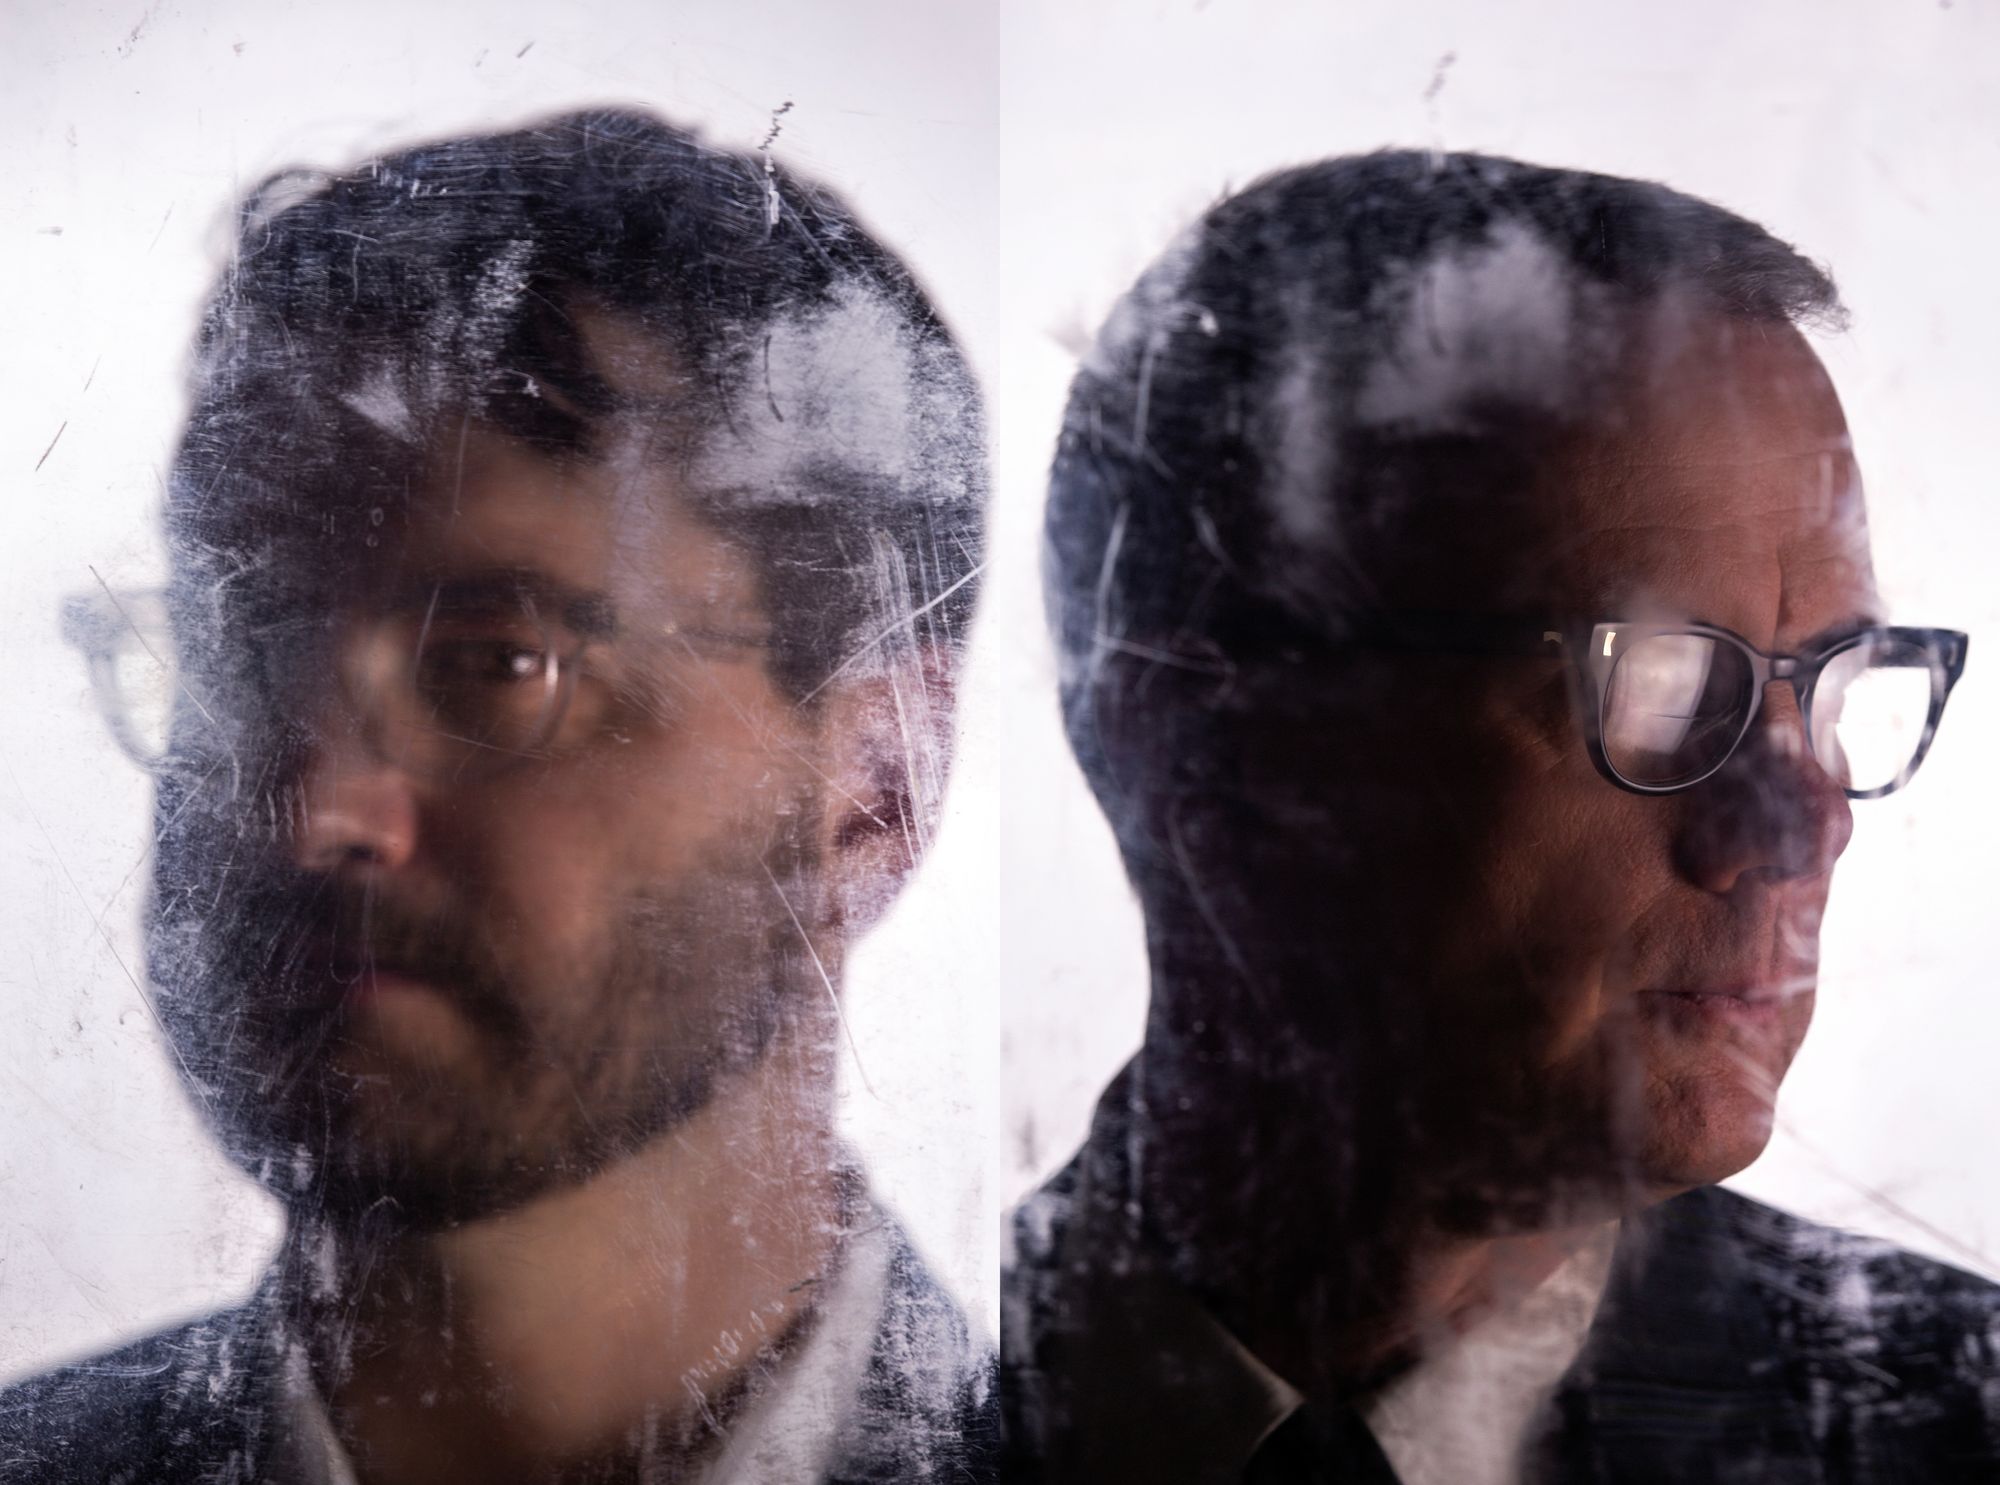 Matmos diptych by Theo Anthony